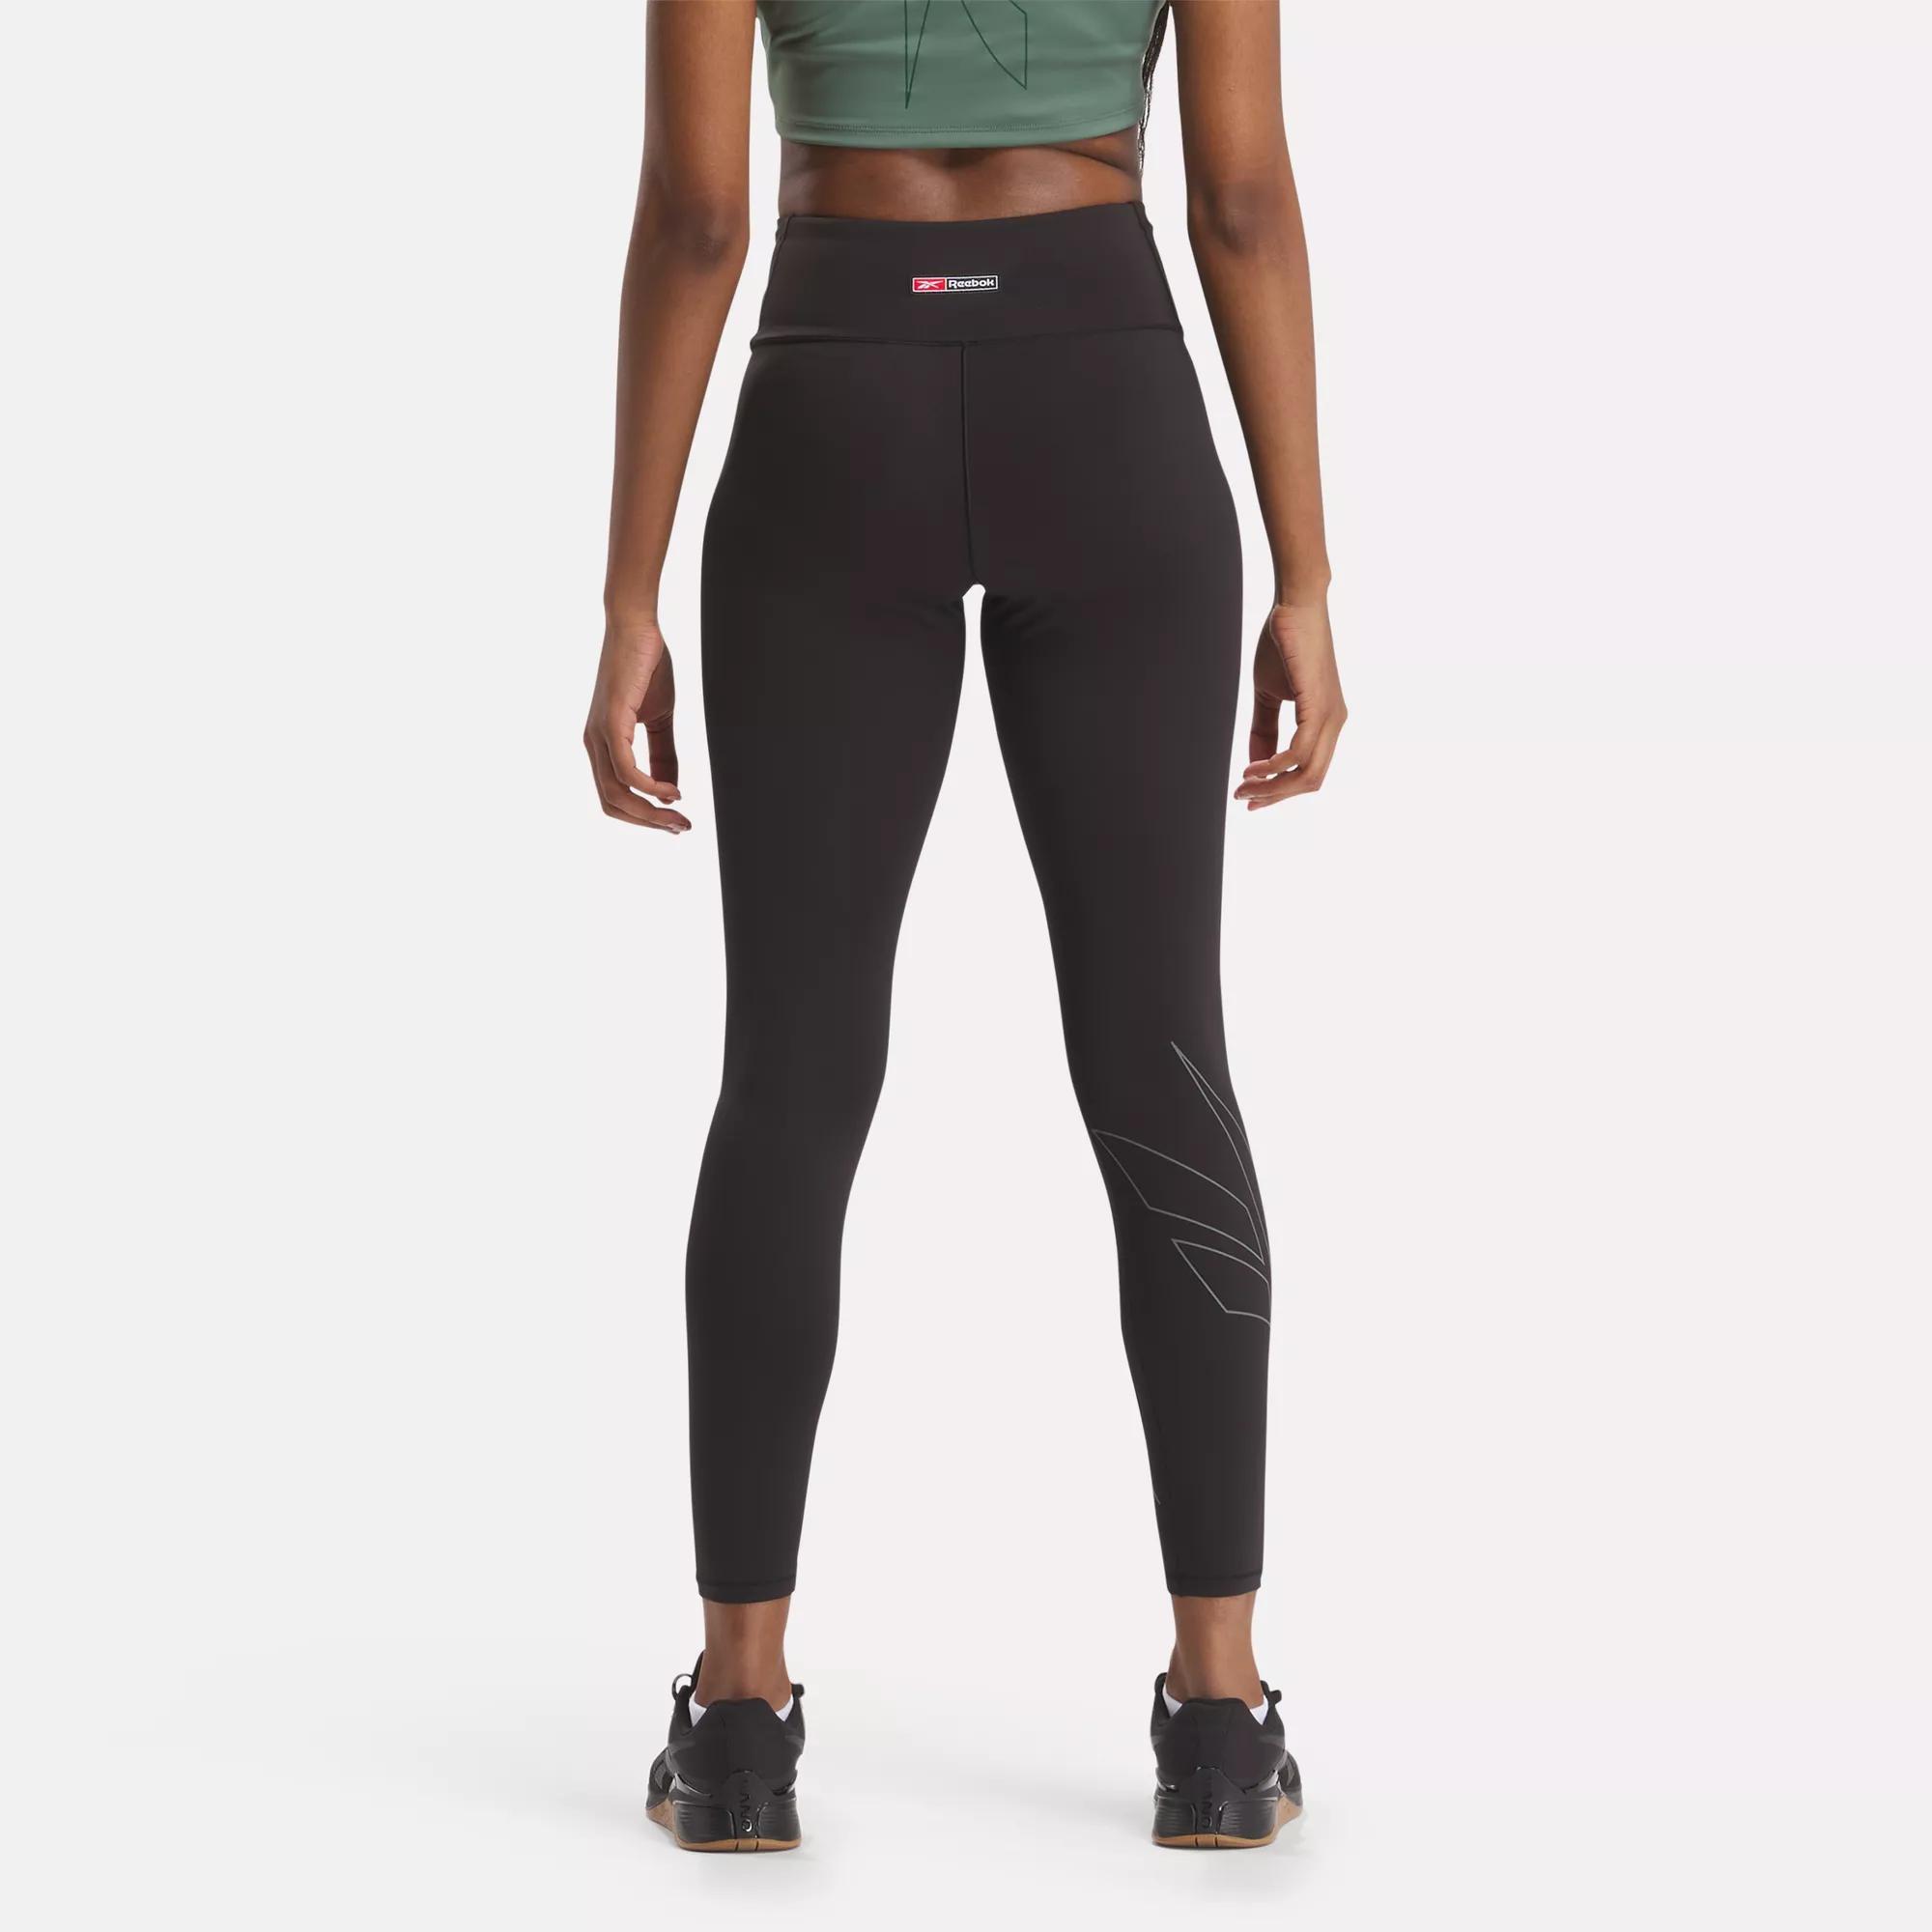 Extra 20% Off Select Styles Basketball Tights & Leggings.